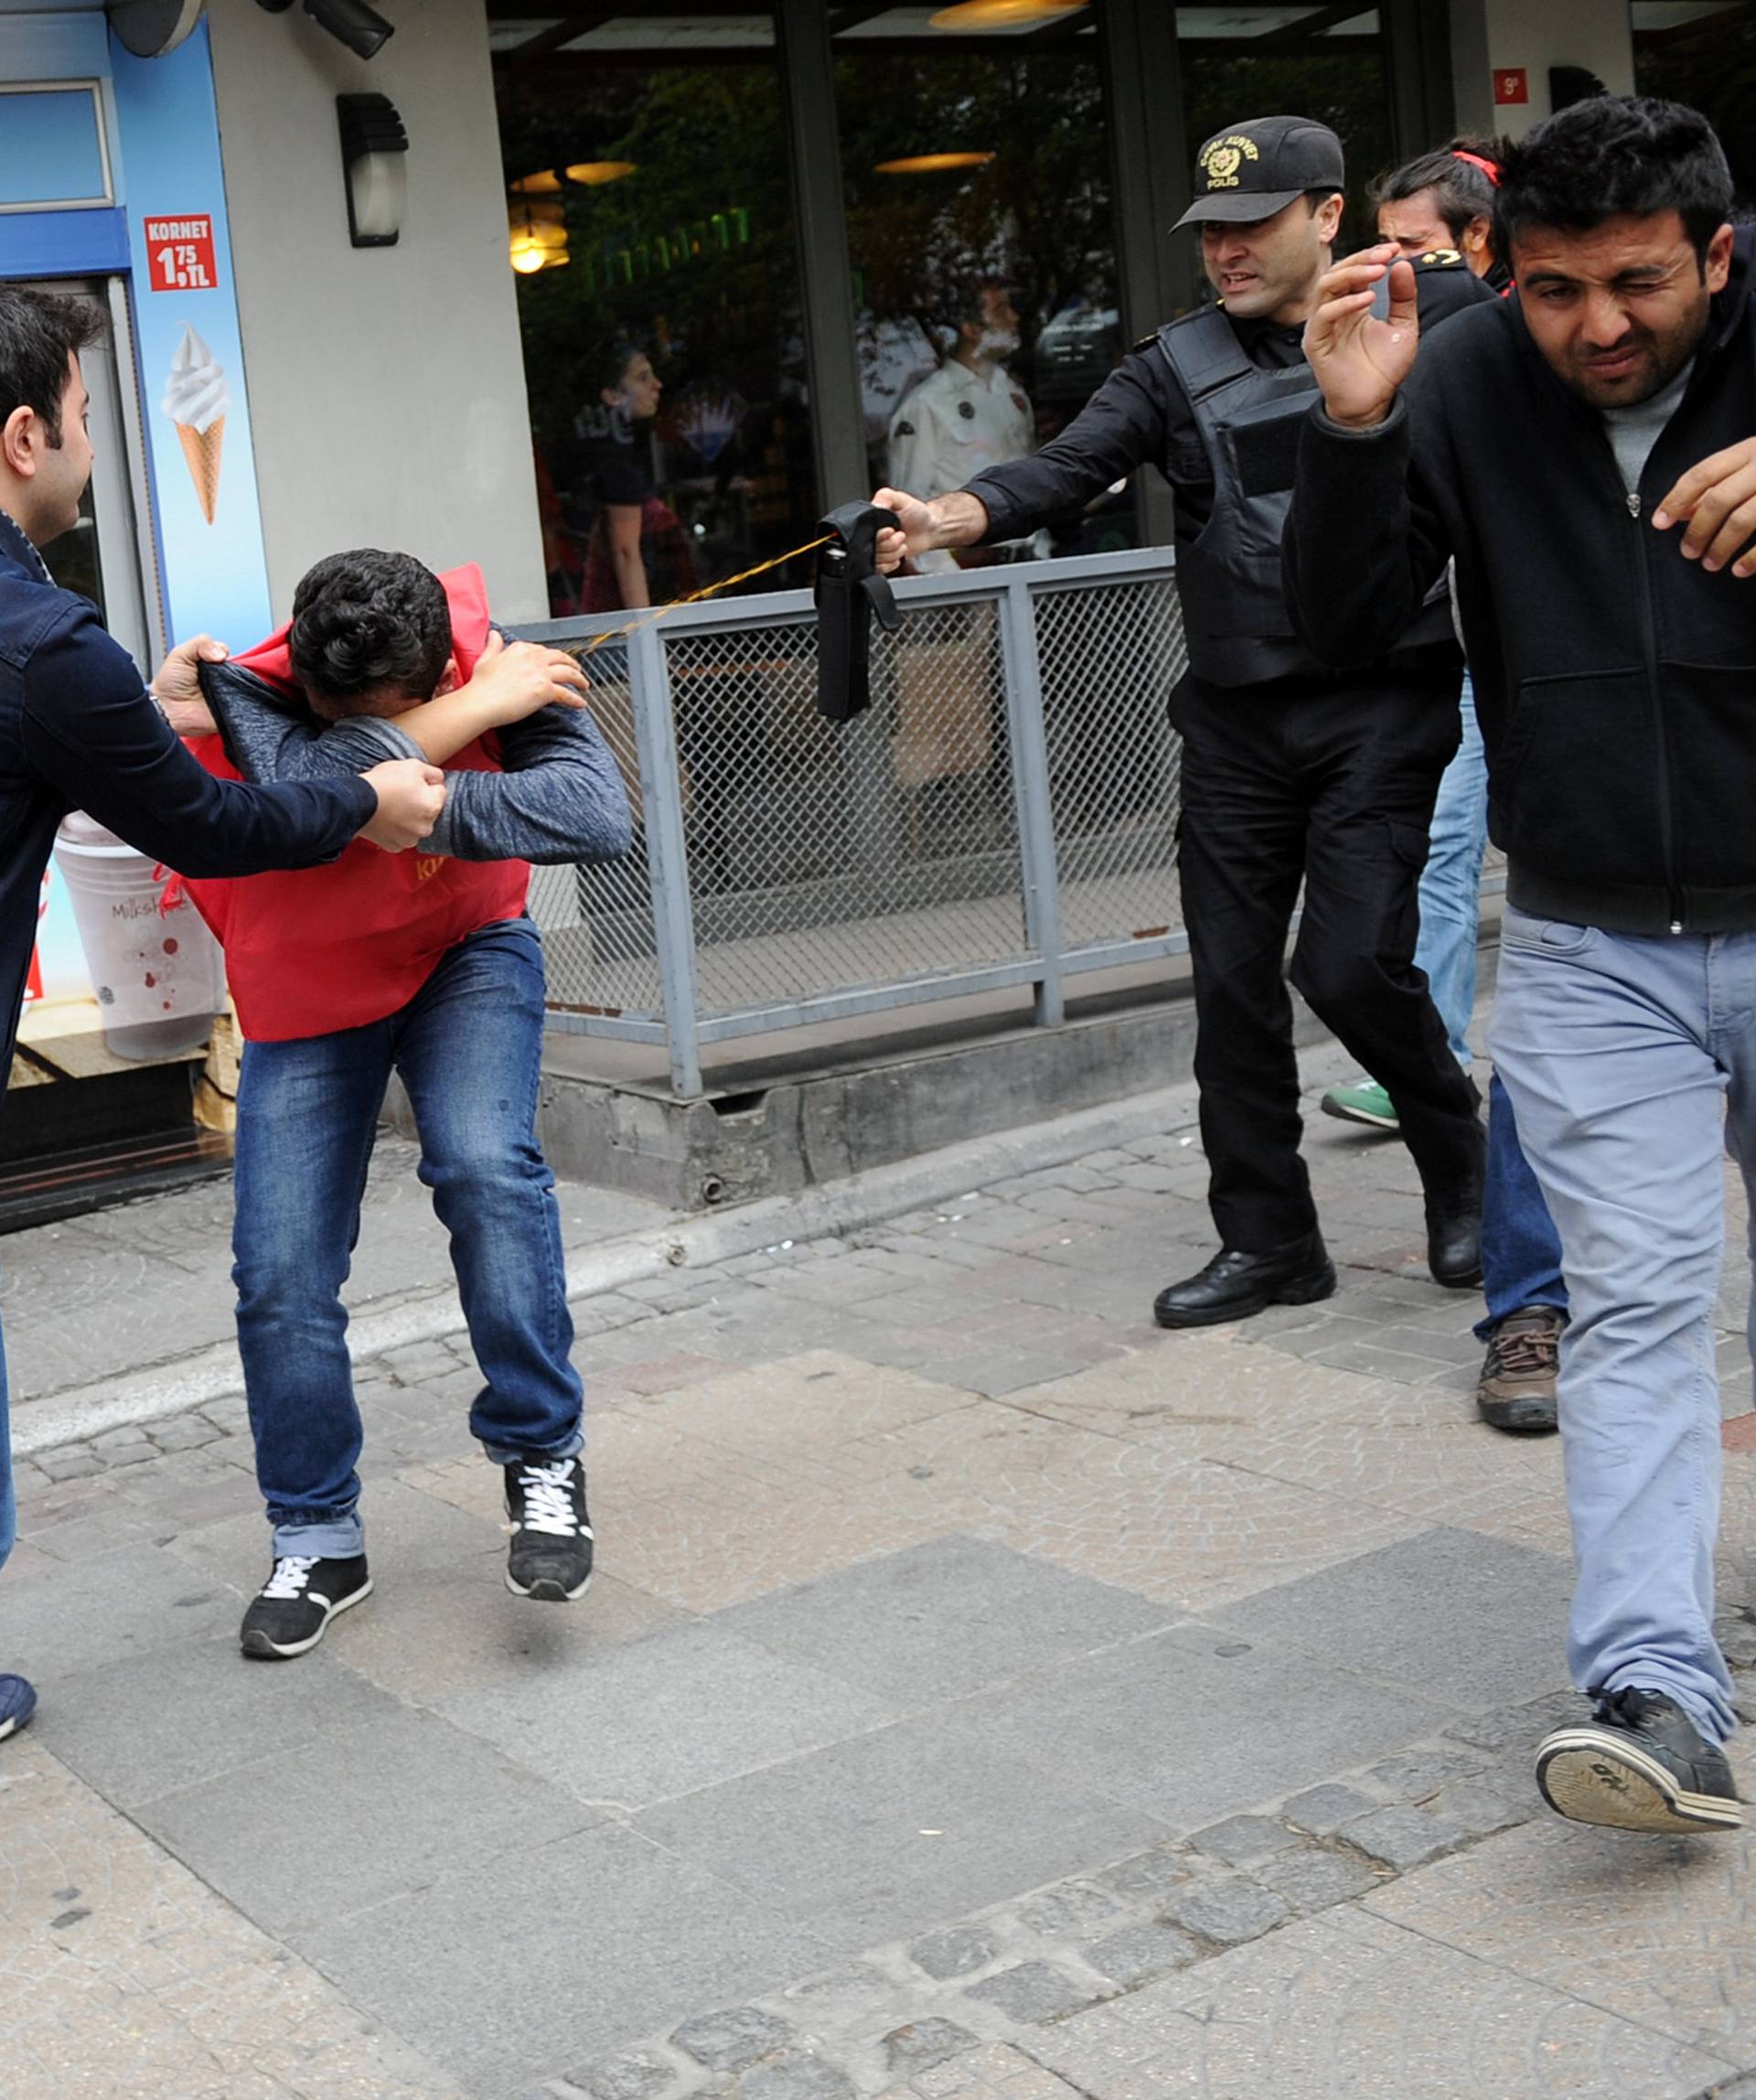 Turkish riot police use pepper spray while detaining a group of protesters who were attempting to defy a ban and march on Taksim Square to celebrate May Day, in Besiktas neighbourhood of Istanbul